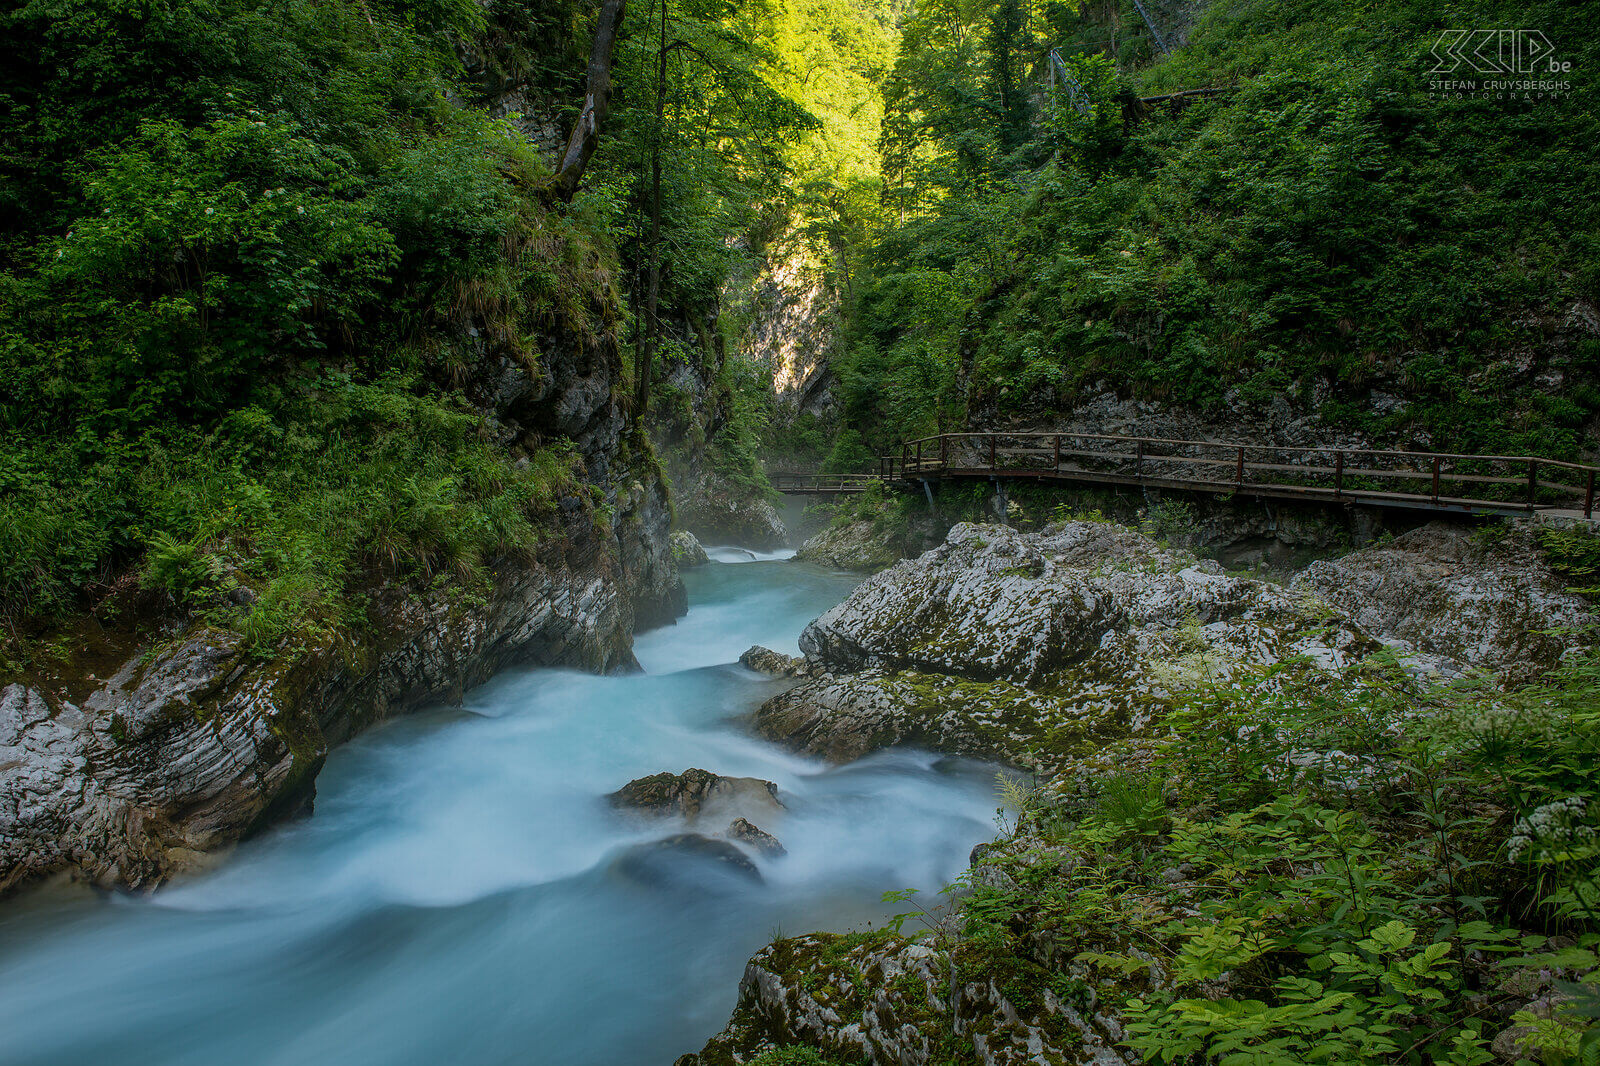 Bled - Vintgar gorge The Vintgar gorge is a beautiful gorge near Bled with a lot of waterfalls and a great walking path with wooden bridges. Stefan Cruysberghs